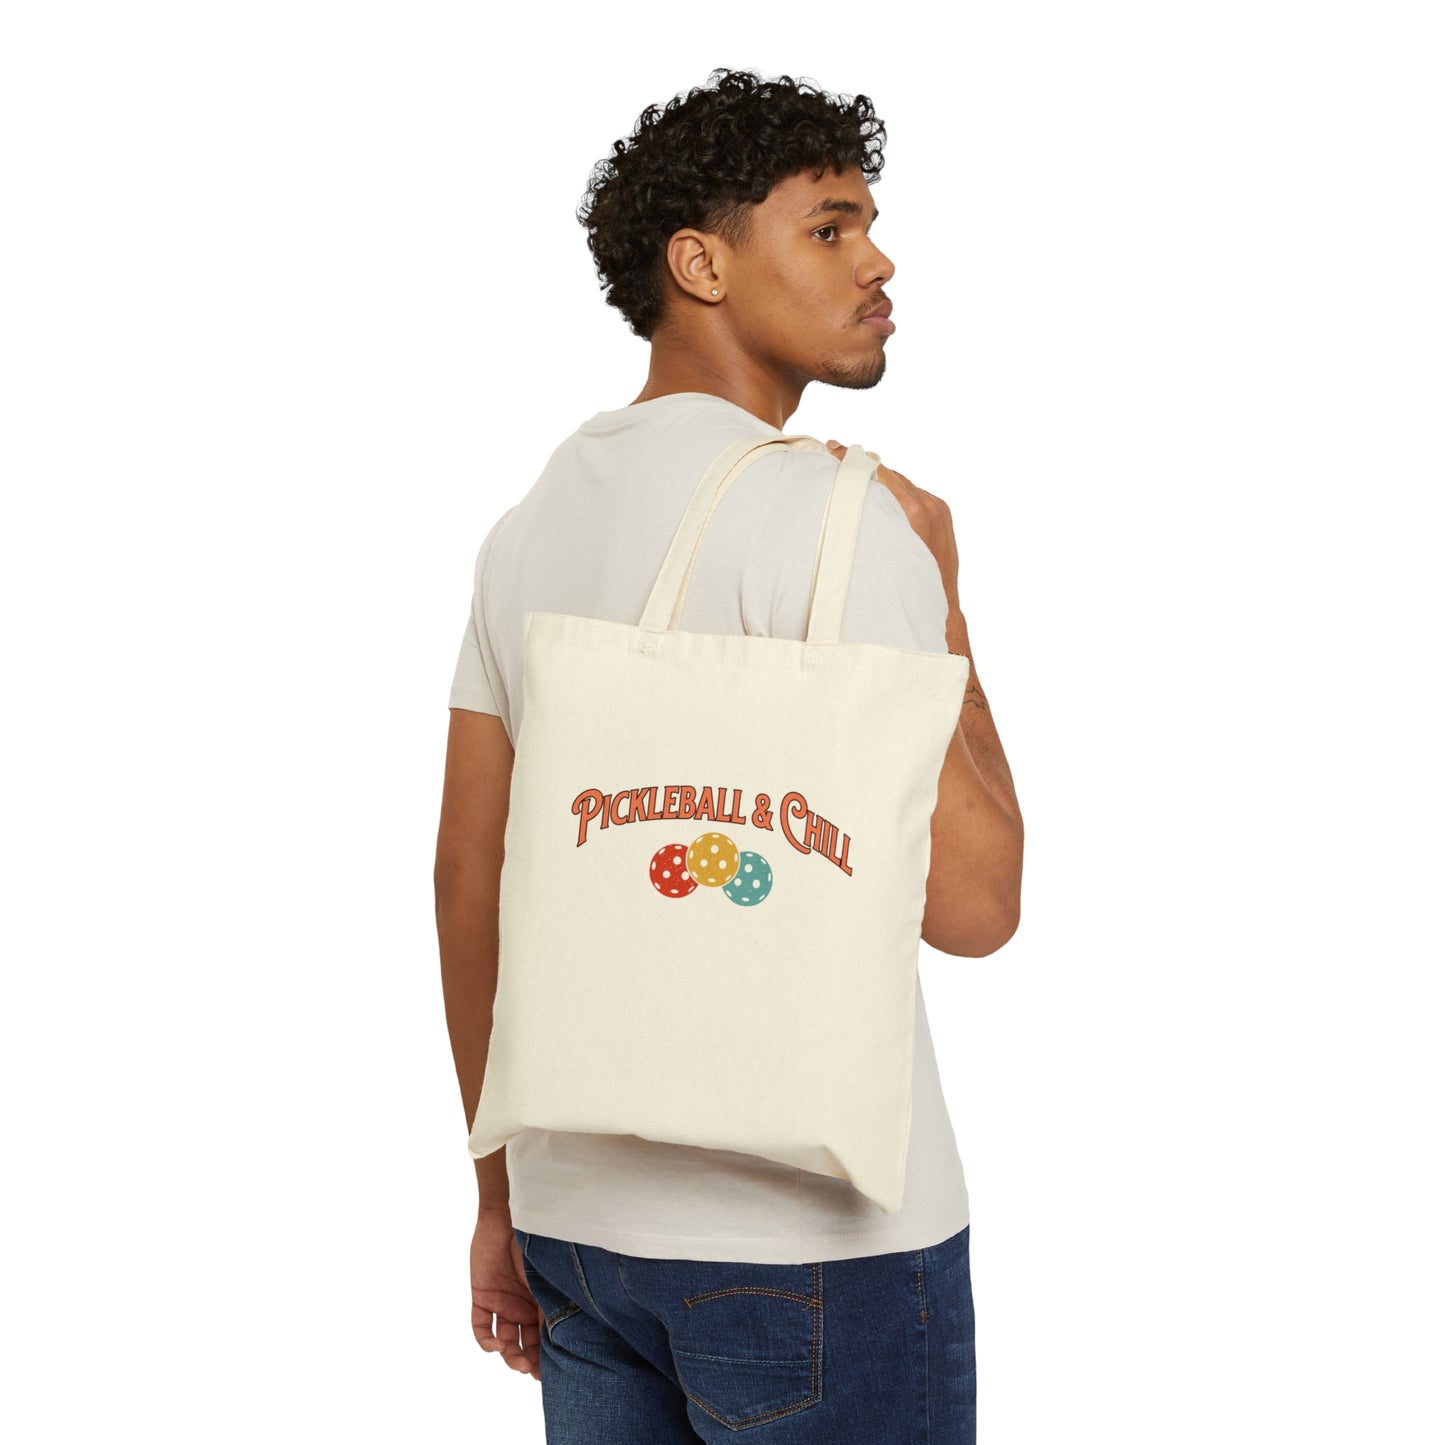 Pickleball & Chill - Tote Bag for Court & Leisure